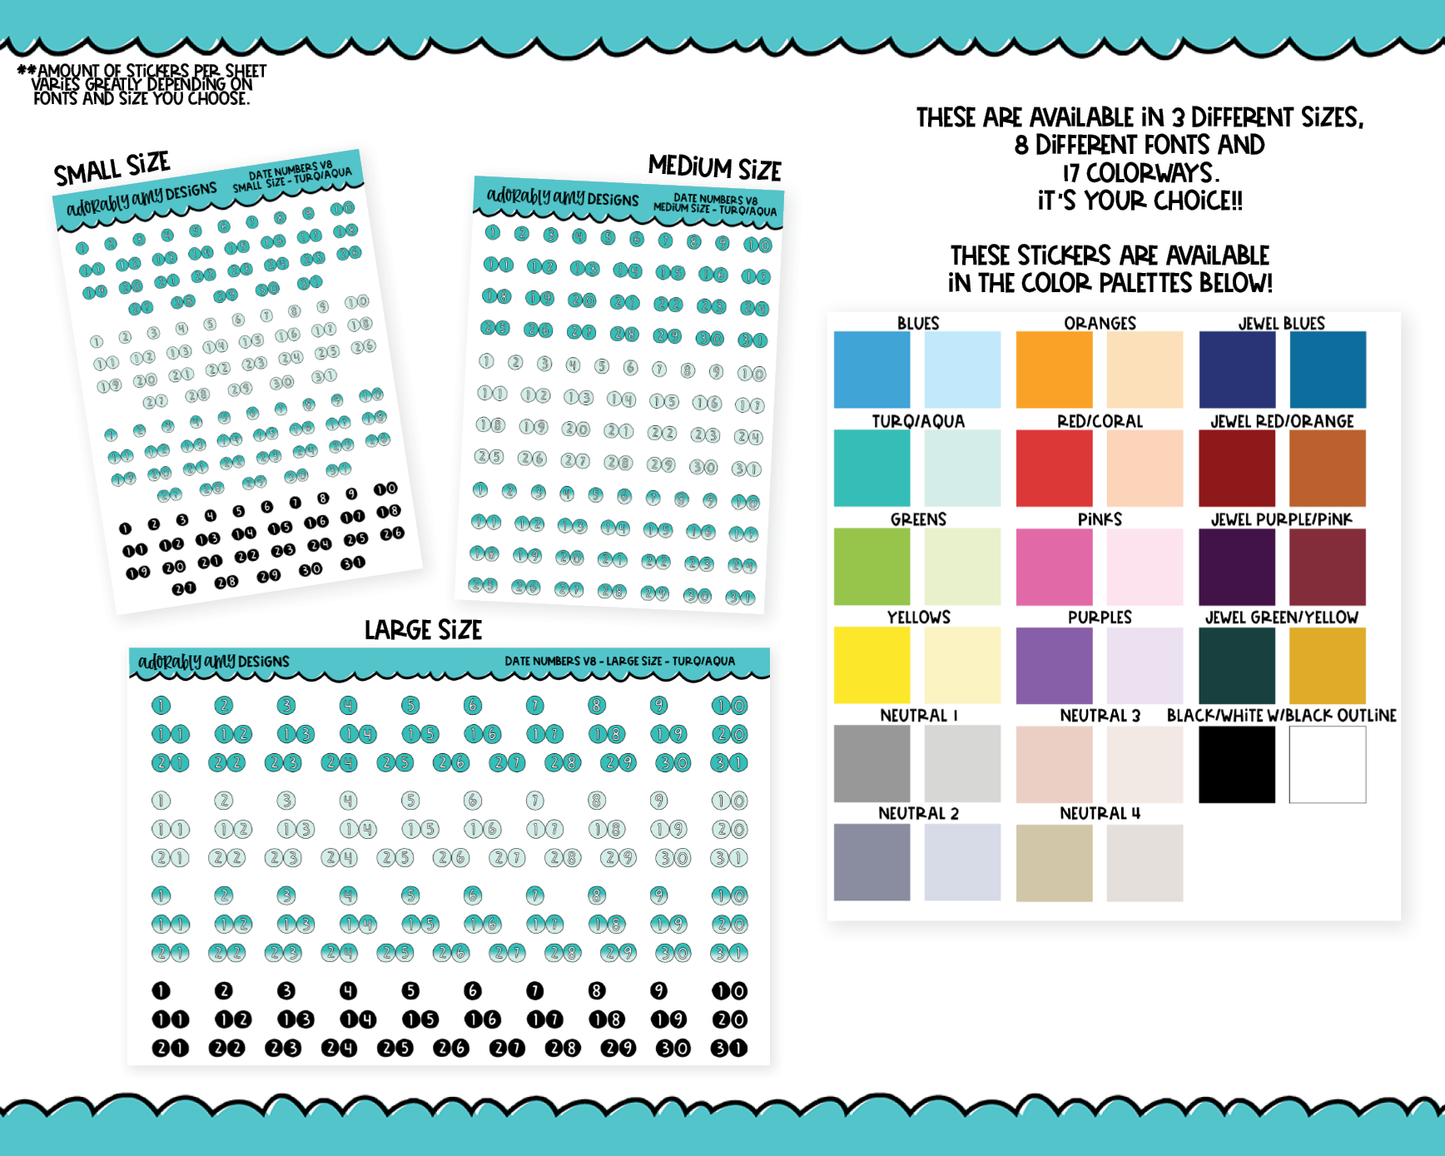 Rainbow or Black Kisscut Date Number Stickers - 8 Fonts - Planner Stickers for any Planner or Insert